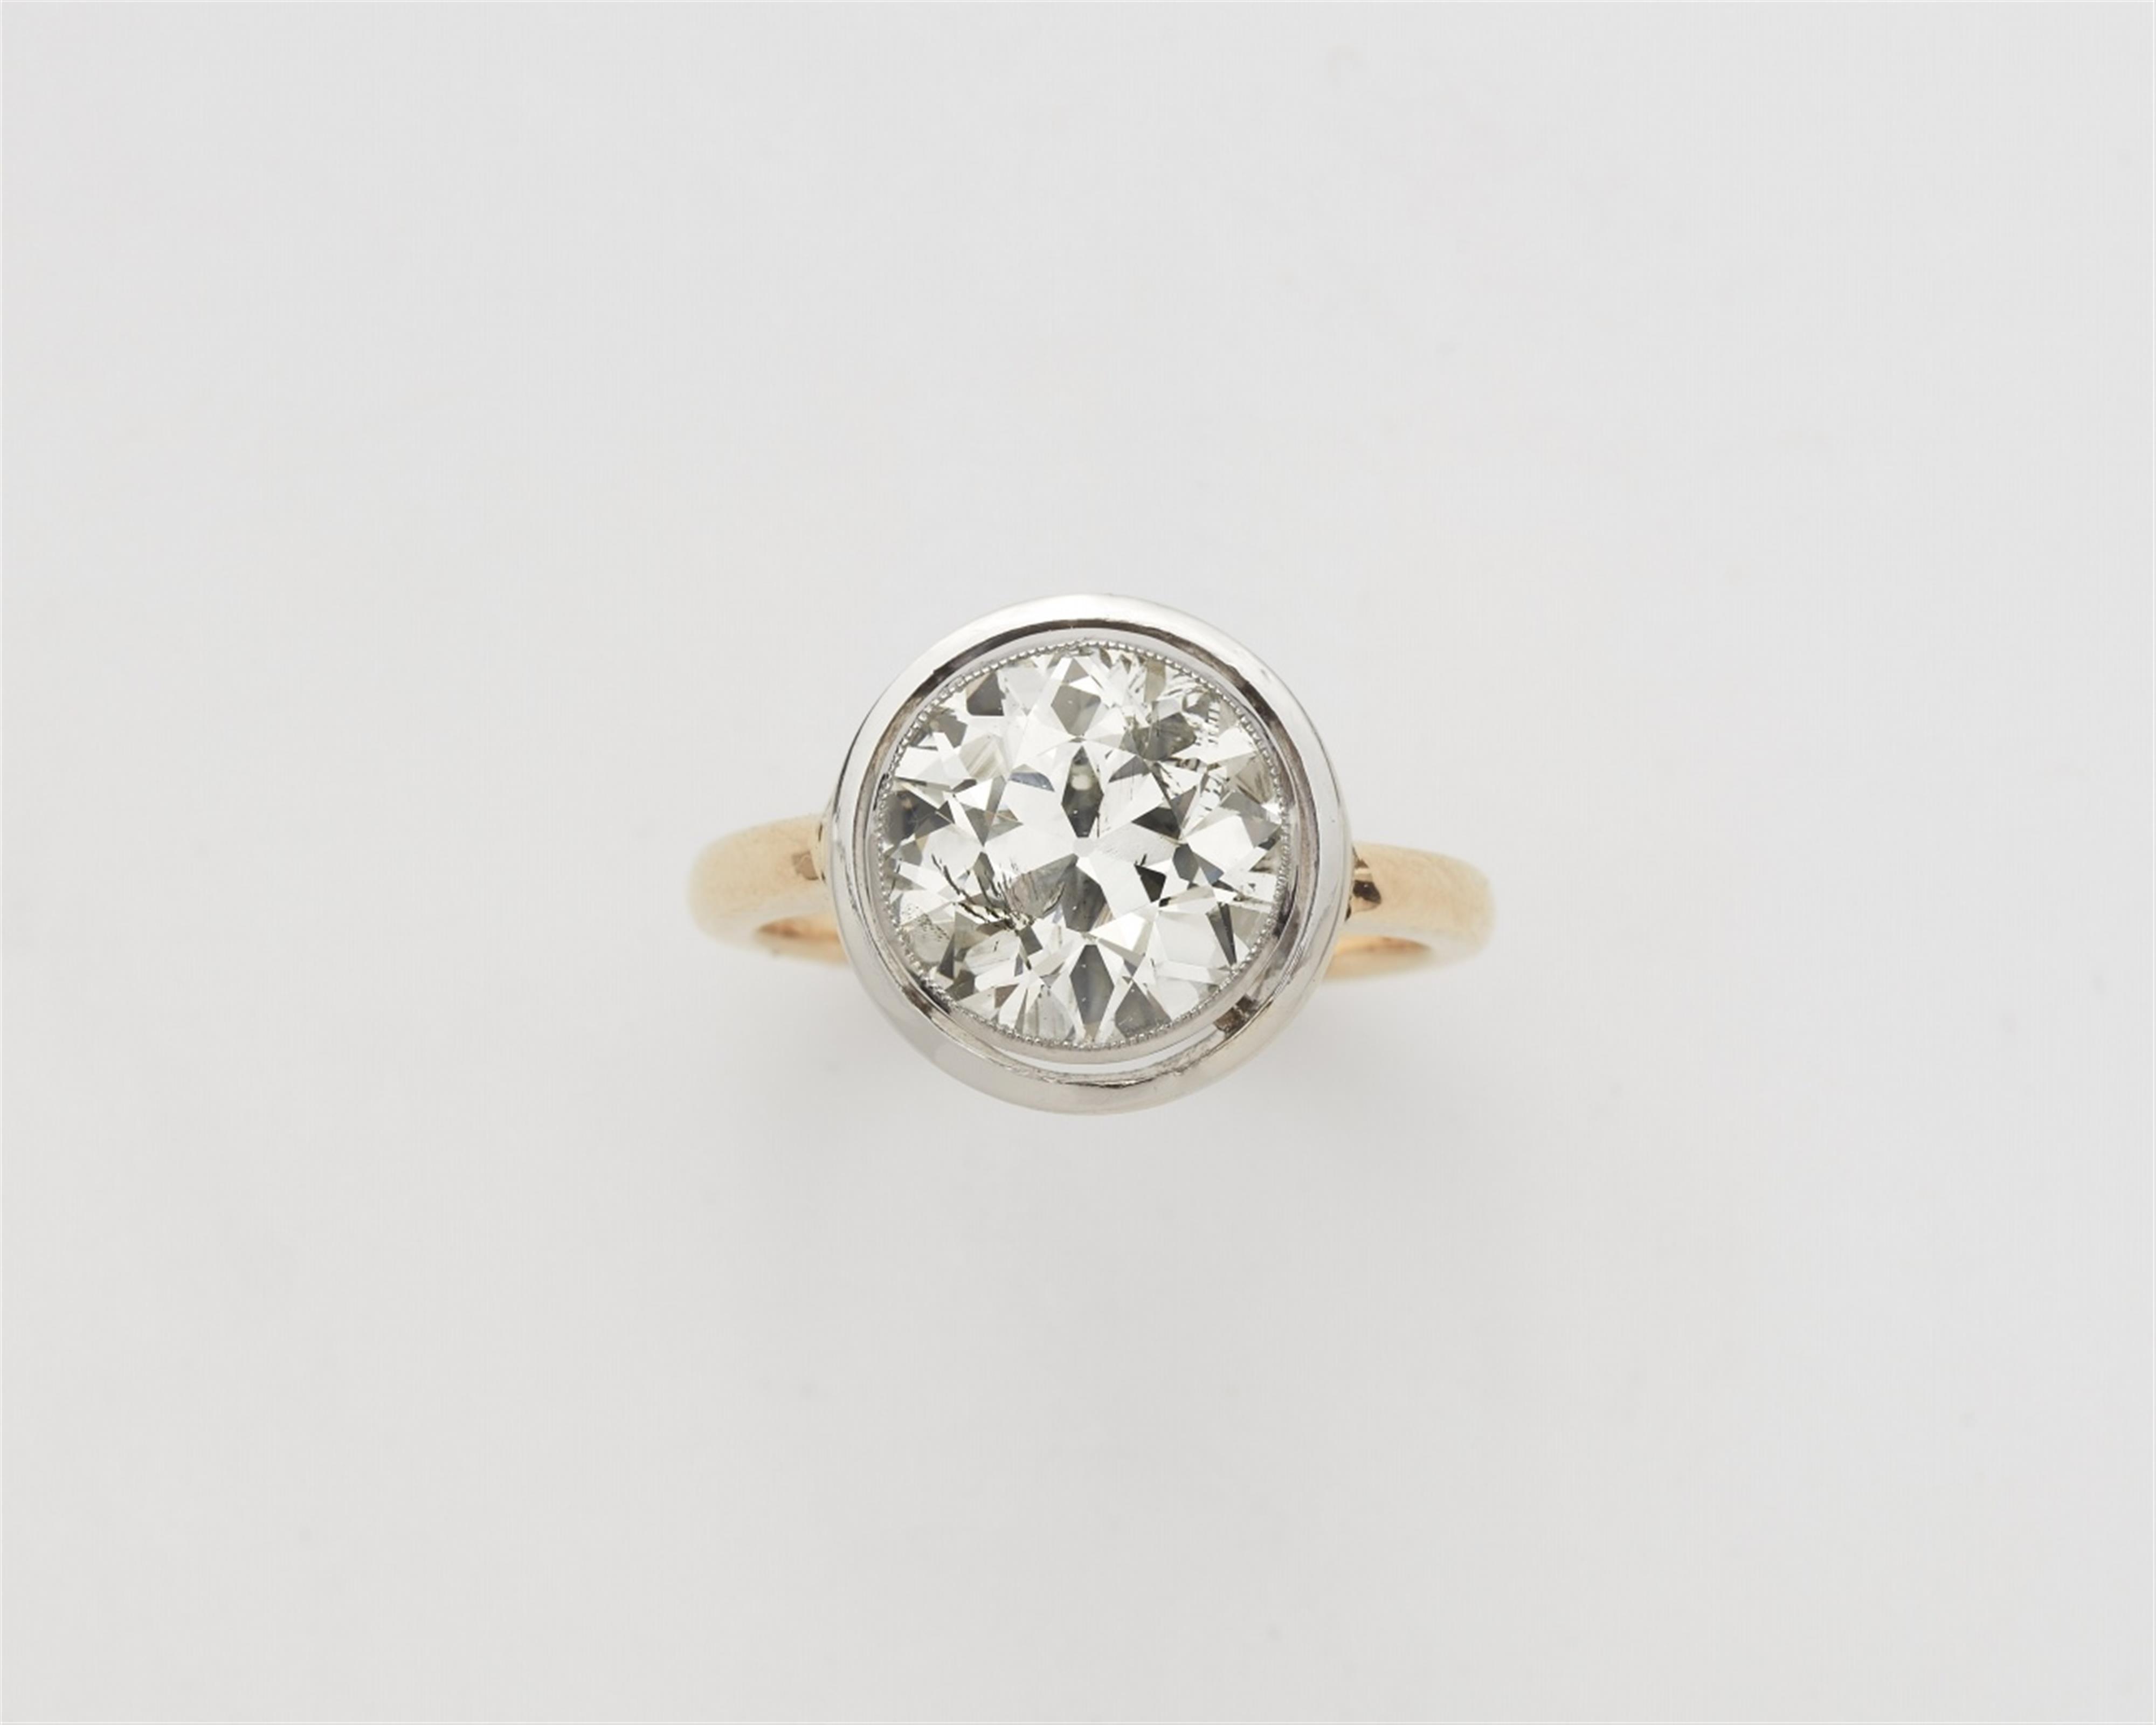 A 14k gold and platinum solitaire ring with a European old-cut diamond - image-1